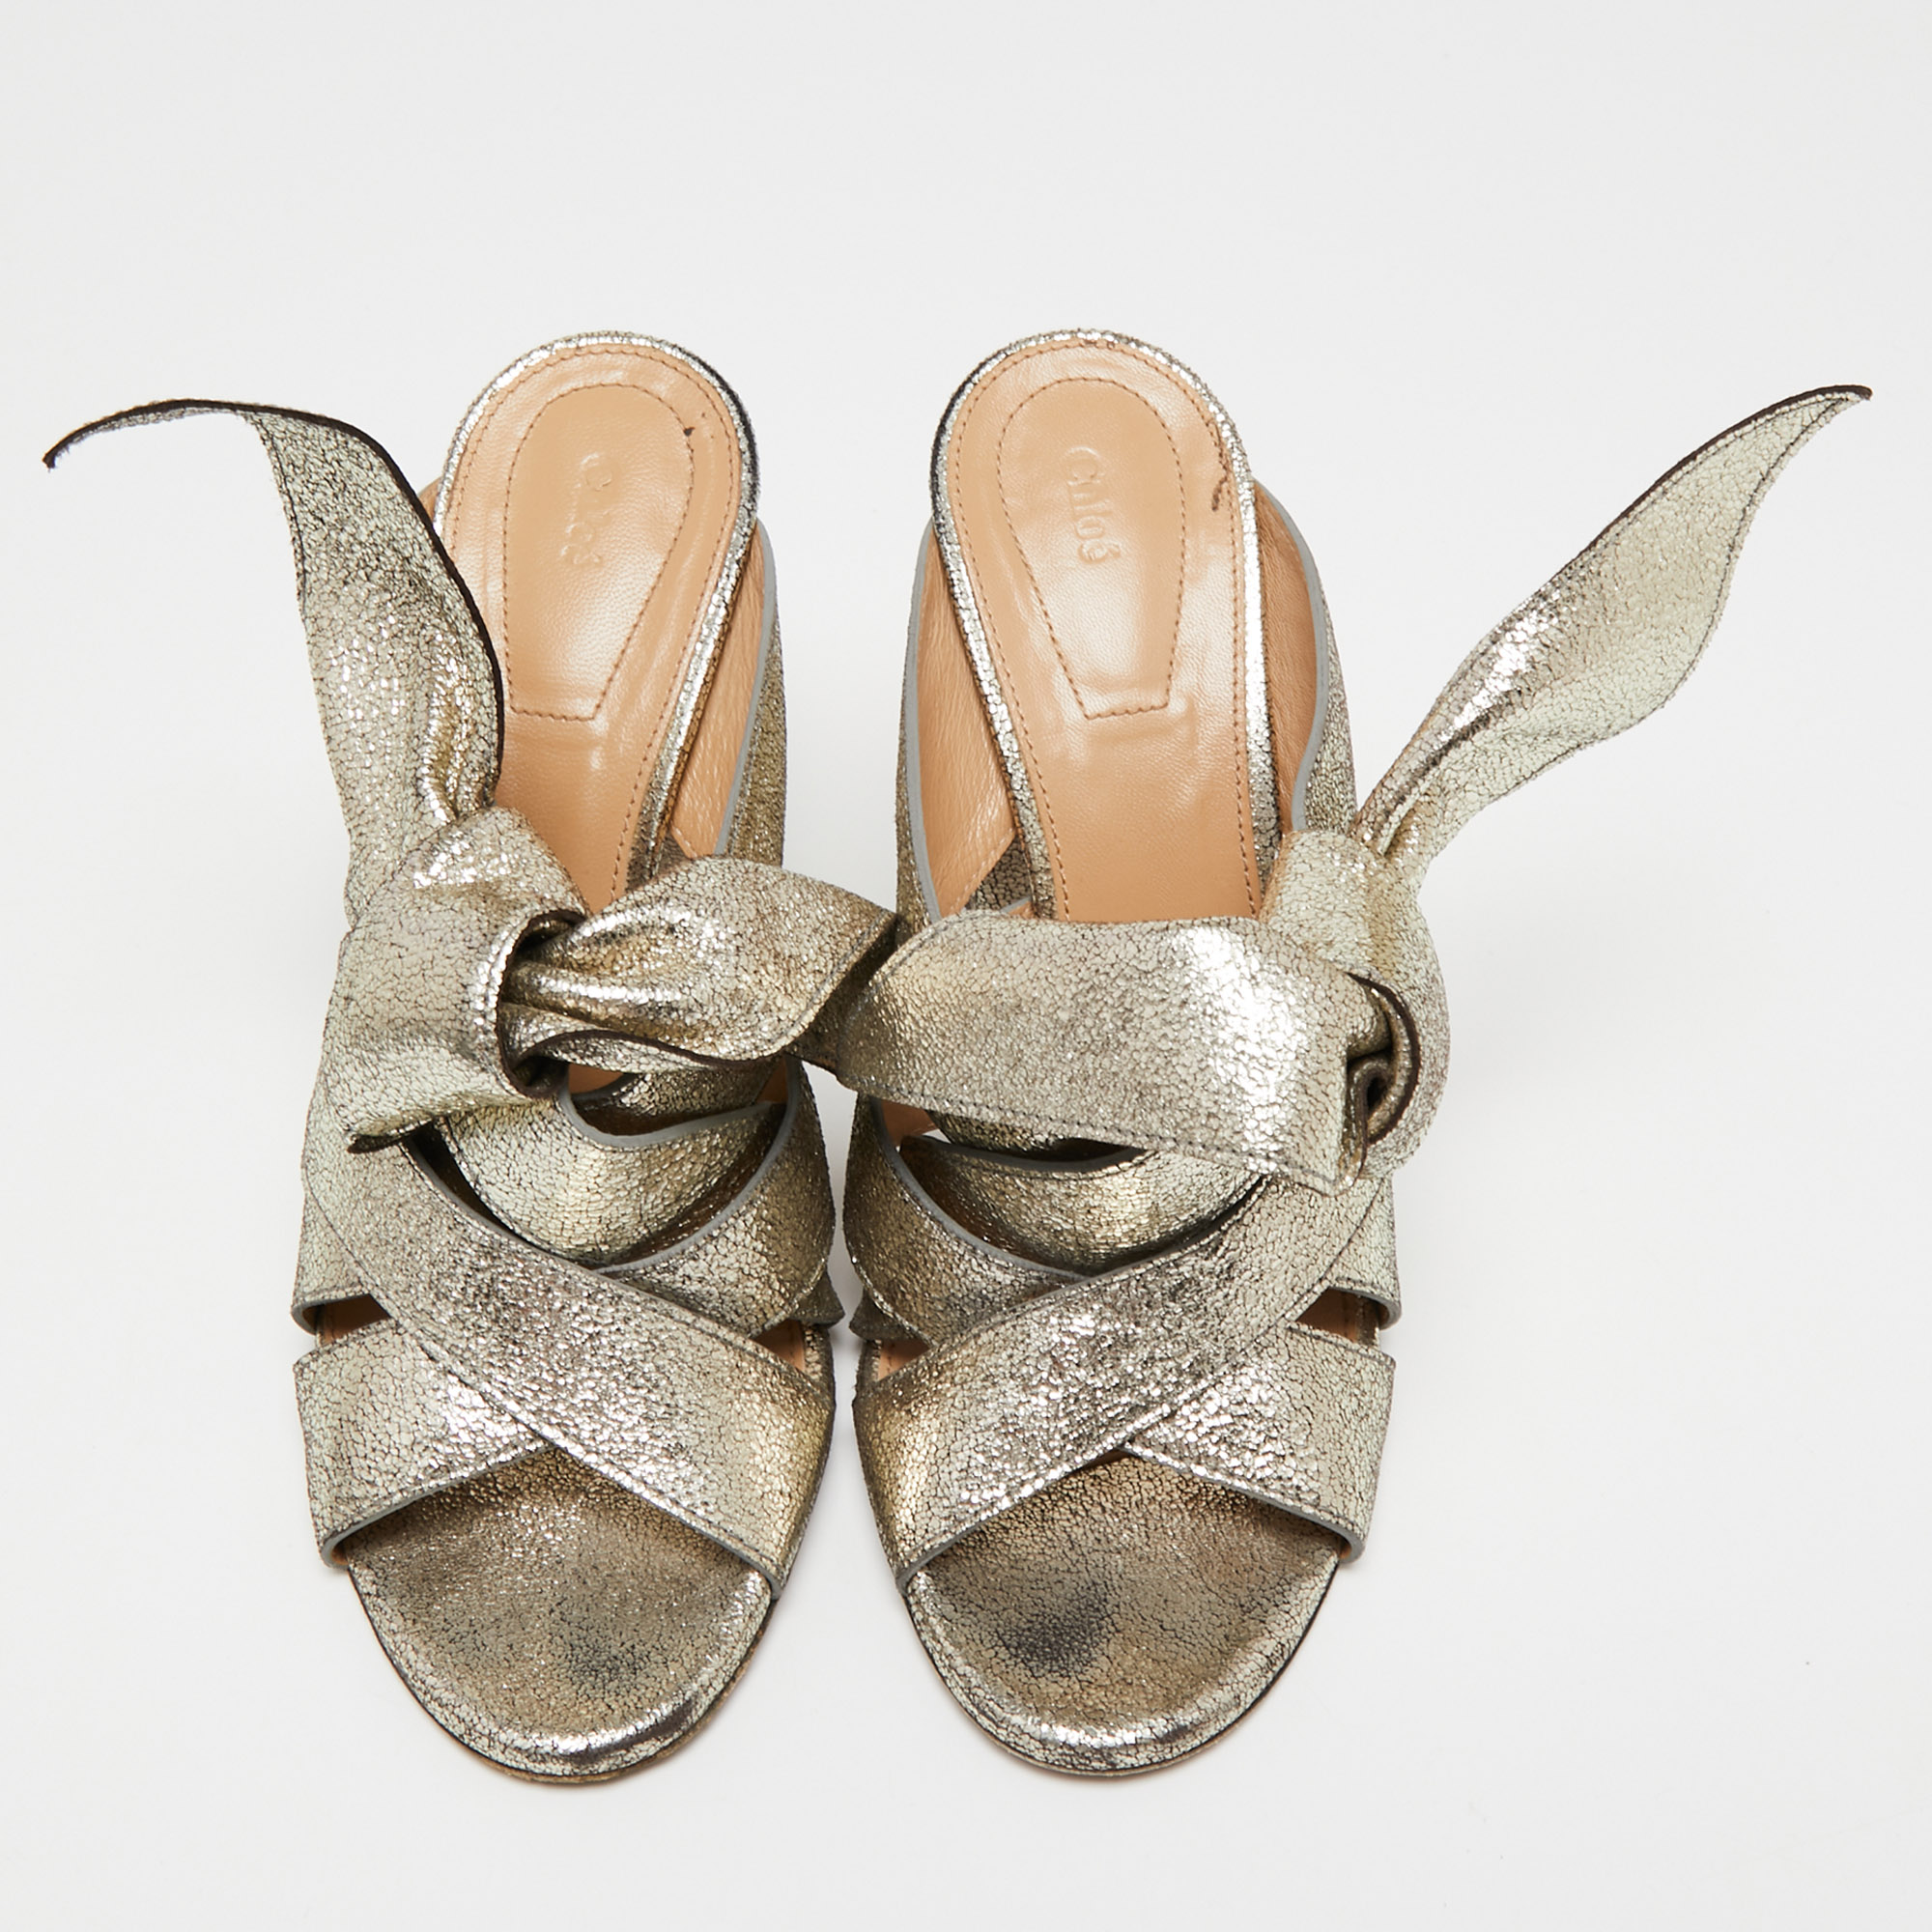 Chloe Light Gold Textured Leather Knot Detail Mules Size 39